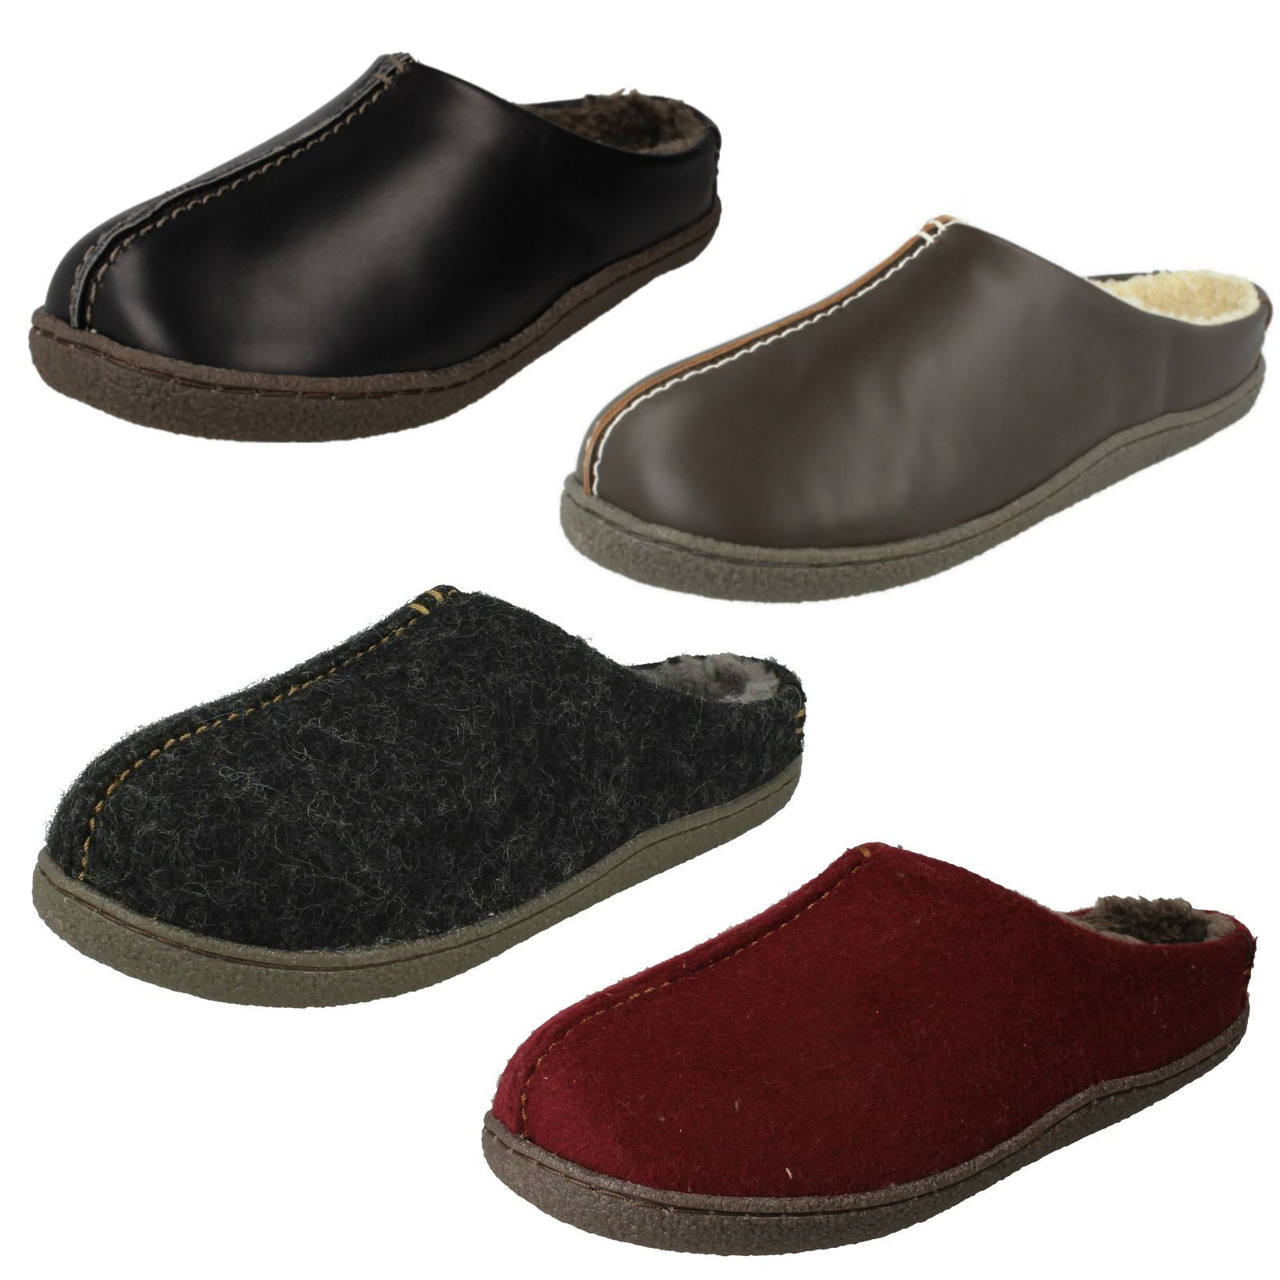 Mens Clarks Mule Slippers Relaxed Style